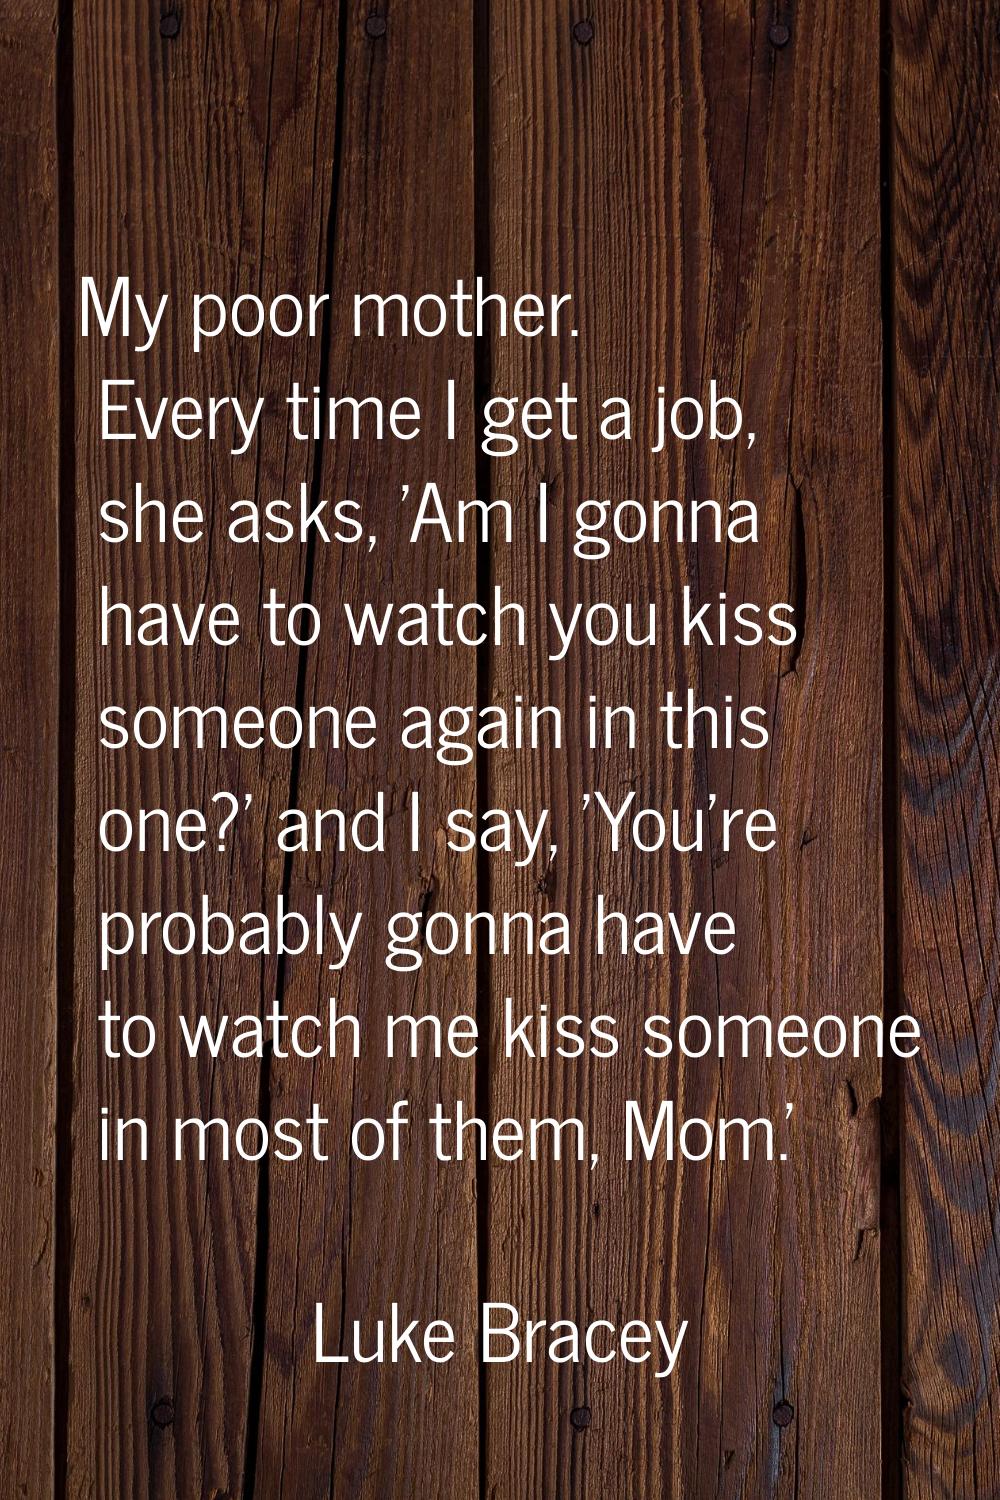 My poor mother. Every time I get a job, she asks, 'Am I gonna have to watch you kiss someone again 